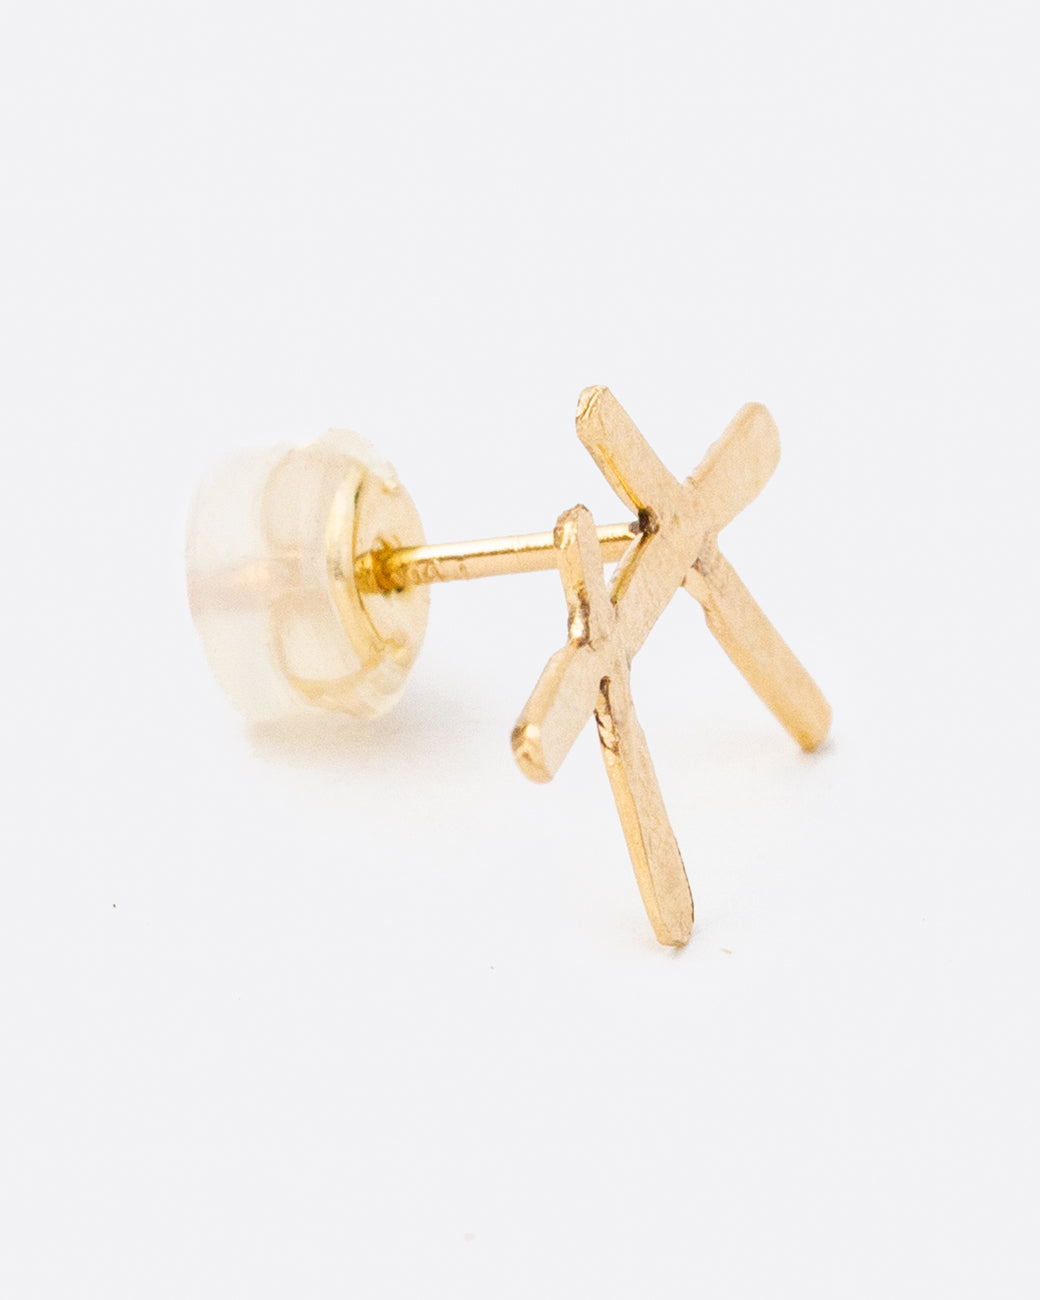 A single earring made from three strands of hammered, fairmined gold.